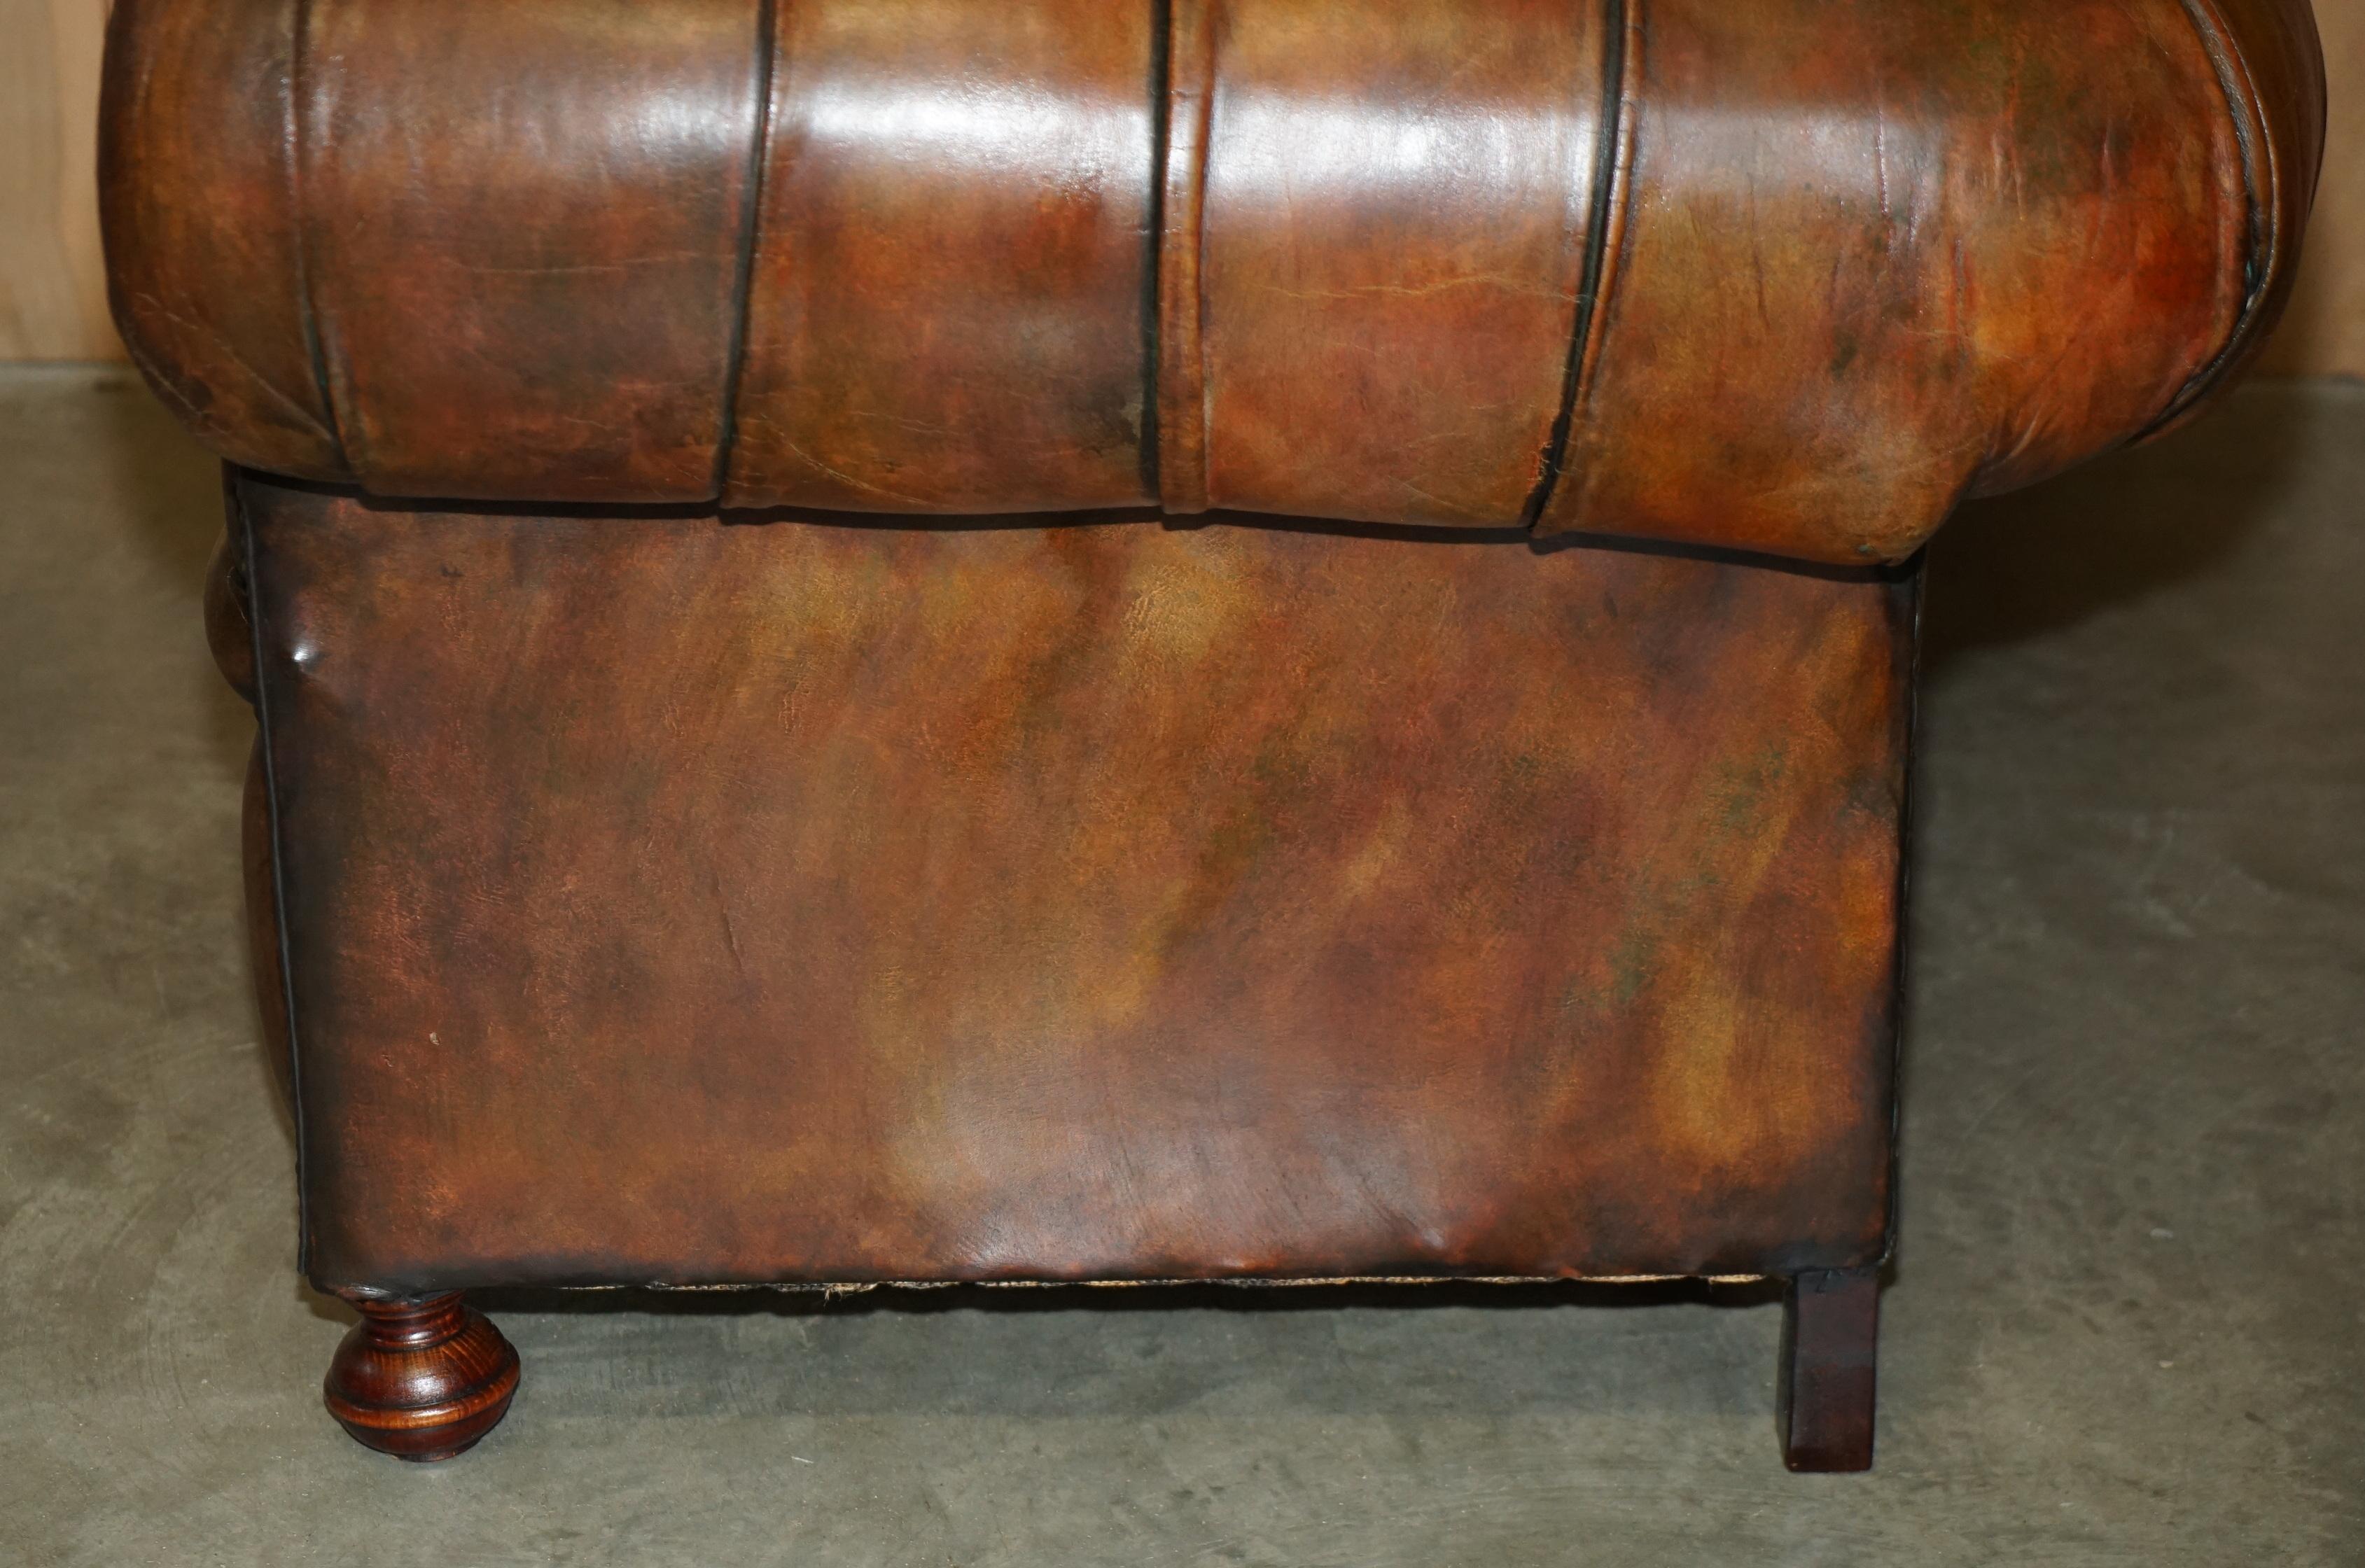 RESTORED VICTORiAN 1890 EXTRA LARGE ARMED CHESTERFIELD BROWN LEATHER CLUB SOFA For Sale 7